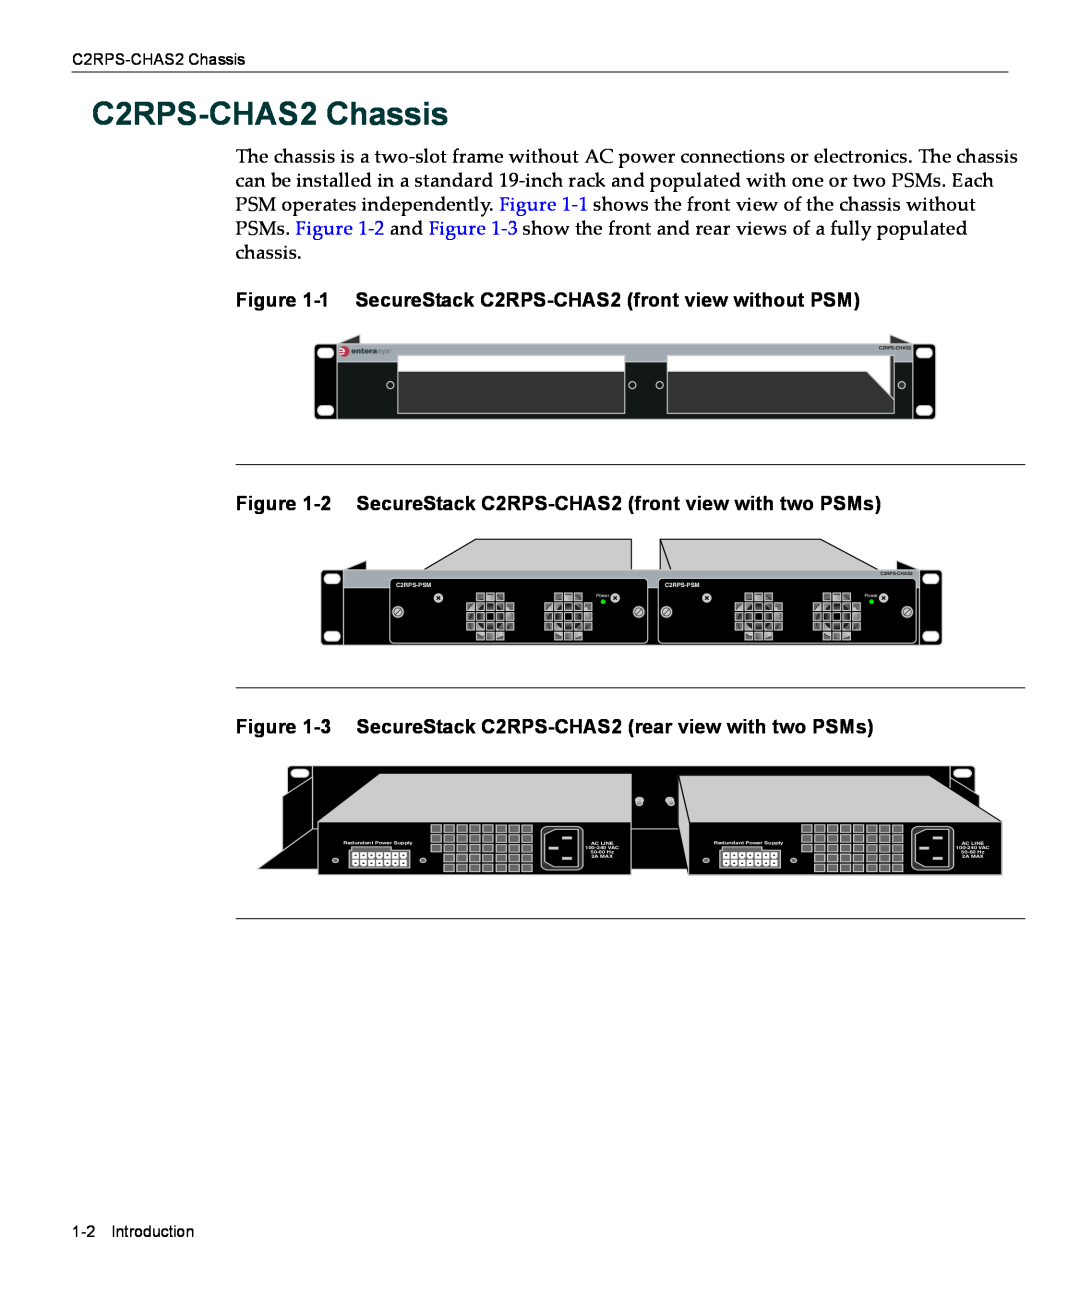 Enterasys Networks manual C2RPS-CHAS2 Chassis, 1 SecureStack C2RPS-CHAS2 front view without PSM 